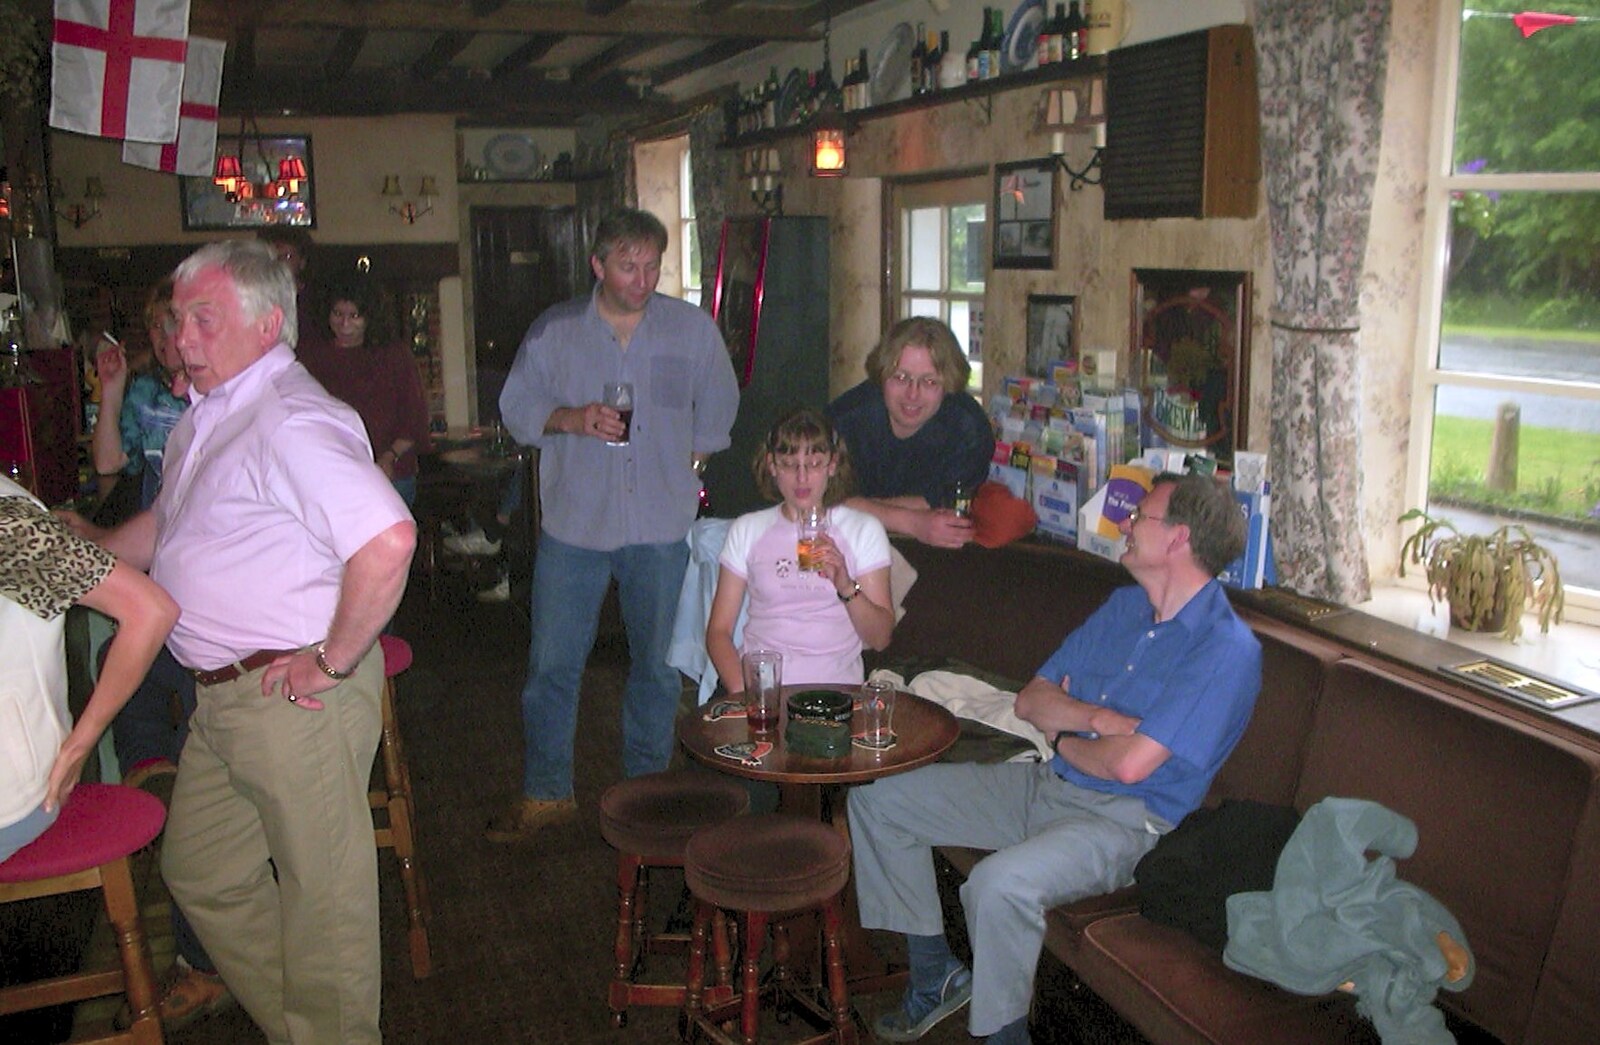 A Rainy Barbeque at the Swan Inn, Brome, Suffolk - 15th June 2002: Suey's on the cider